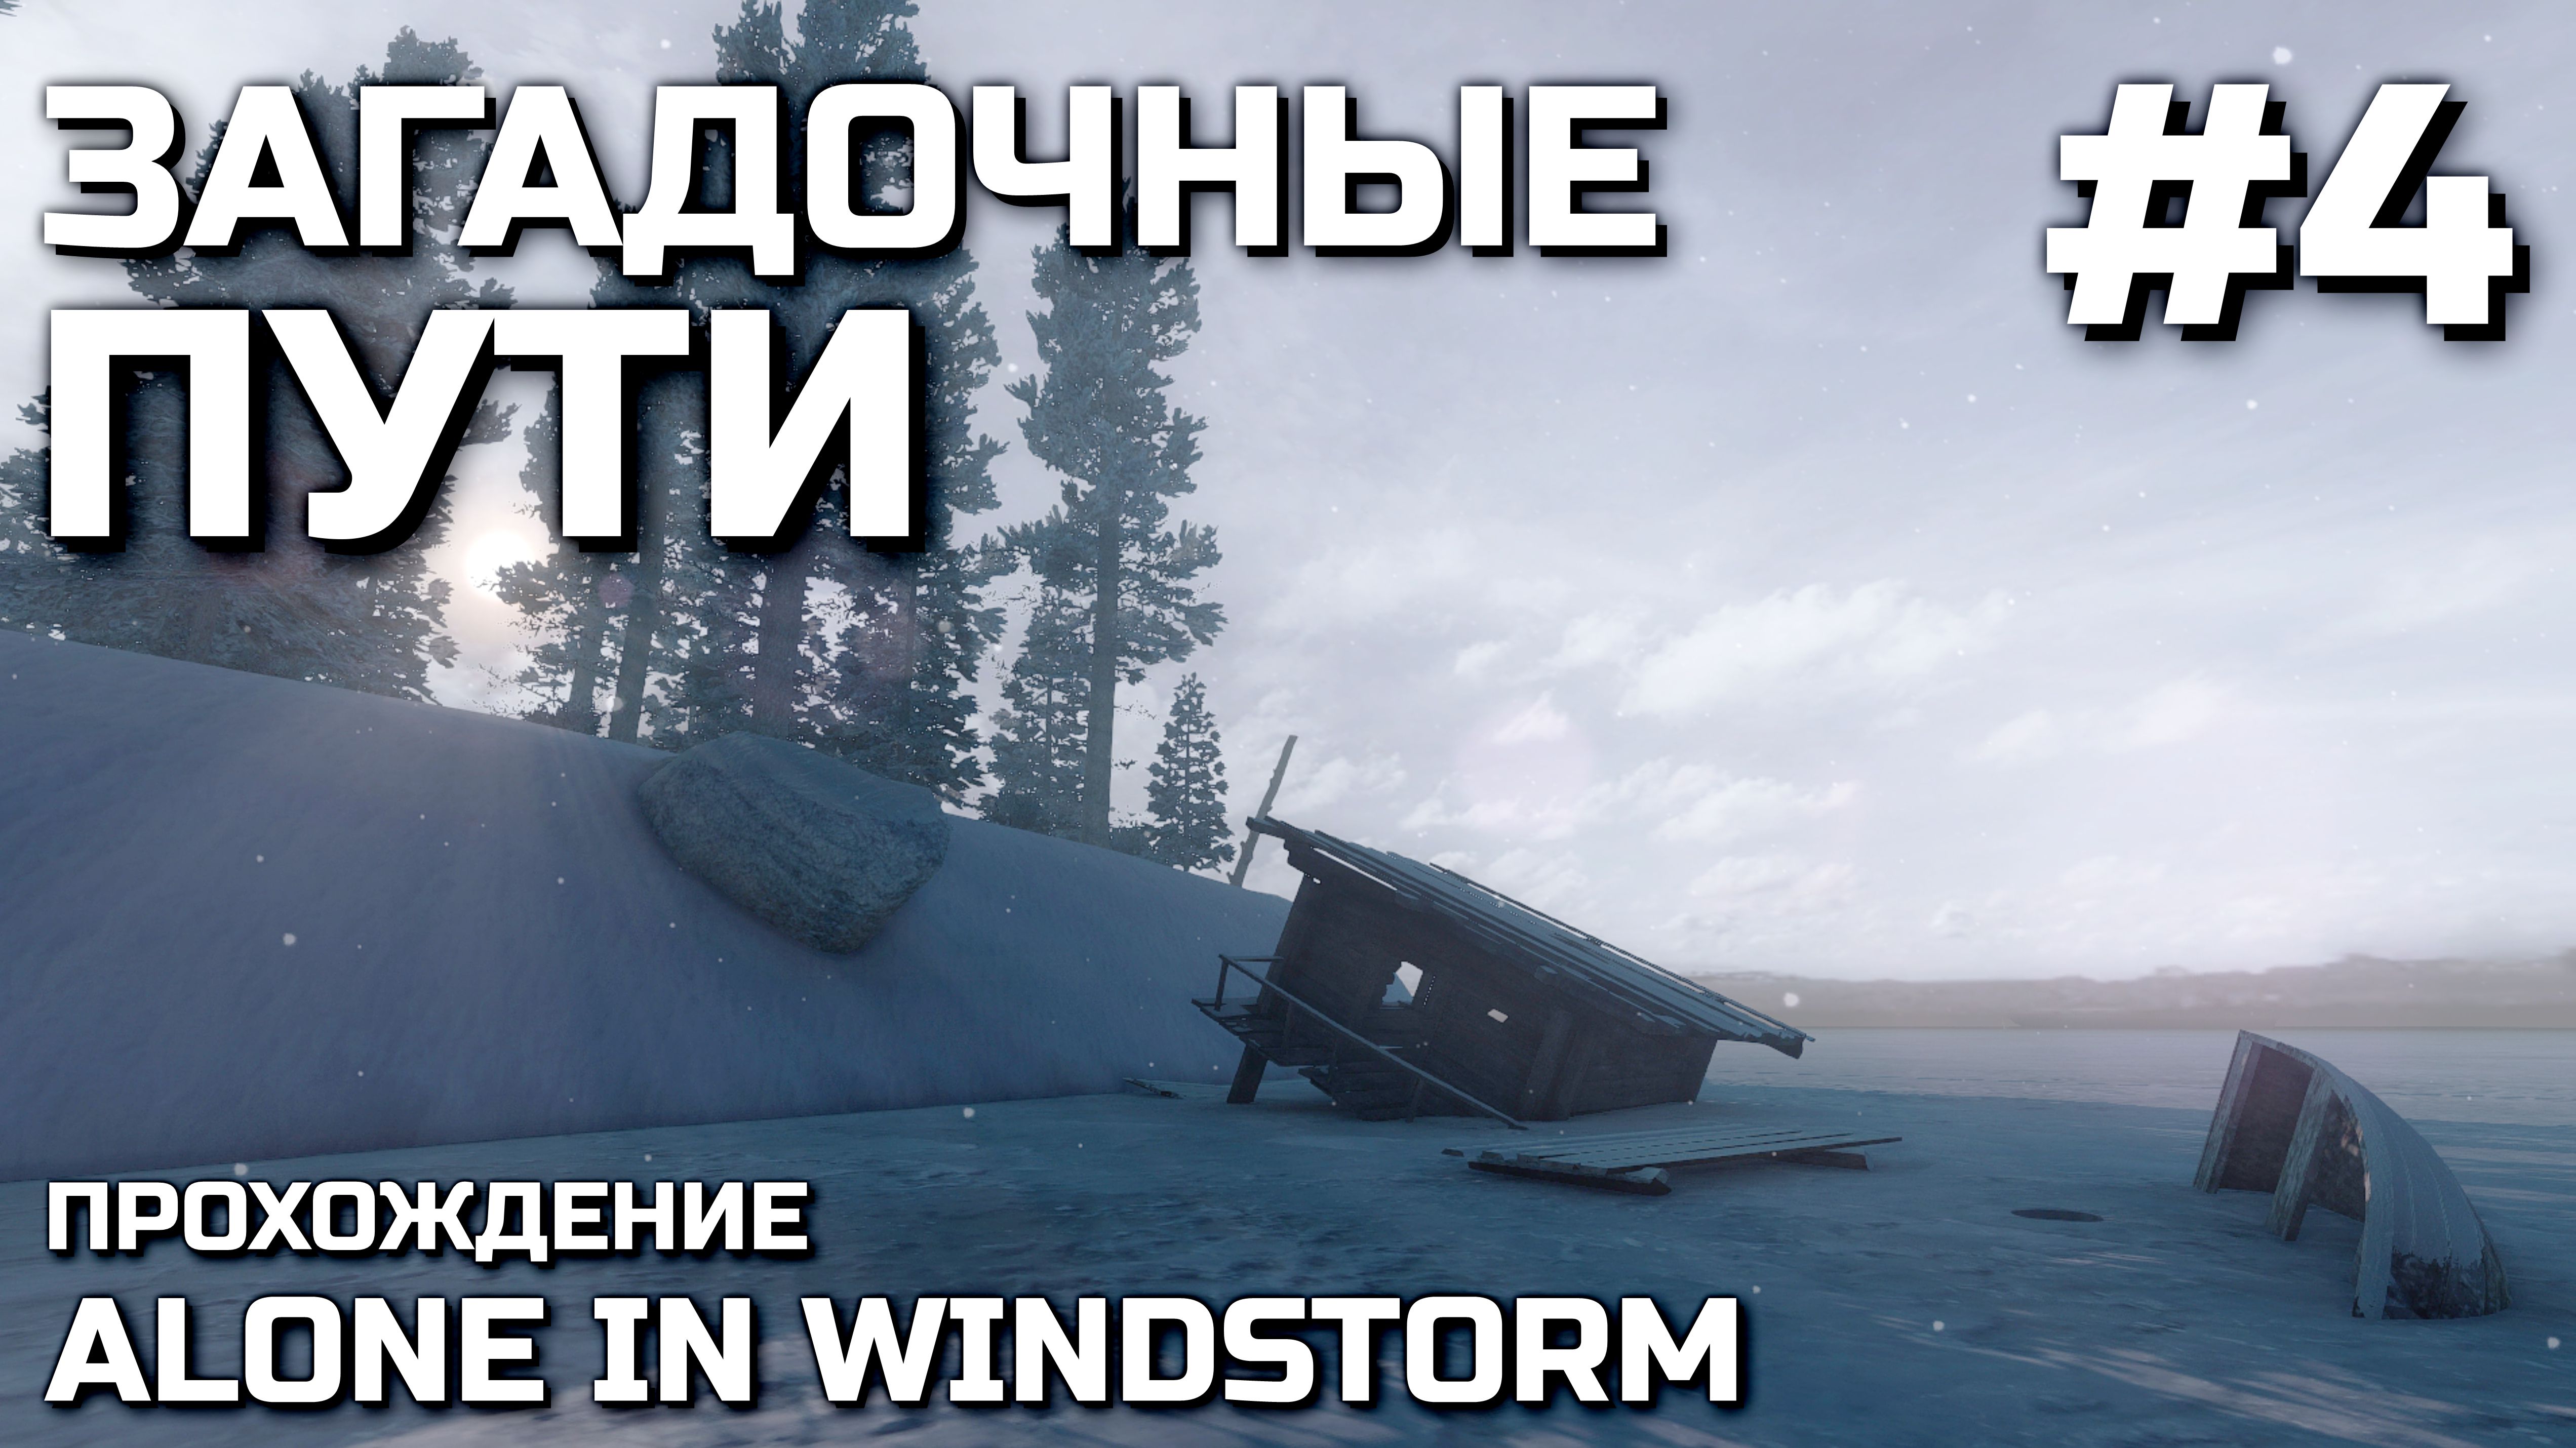 Alone in windstorm карта